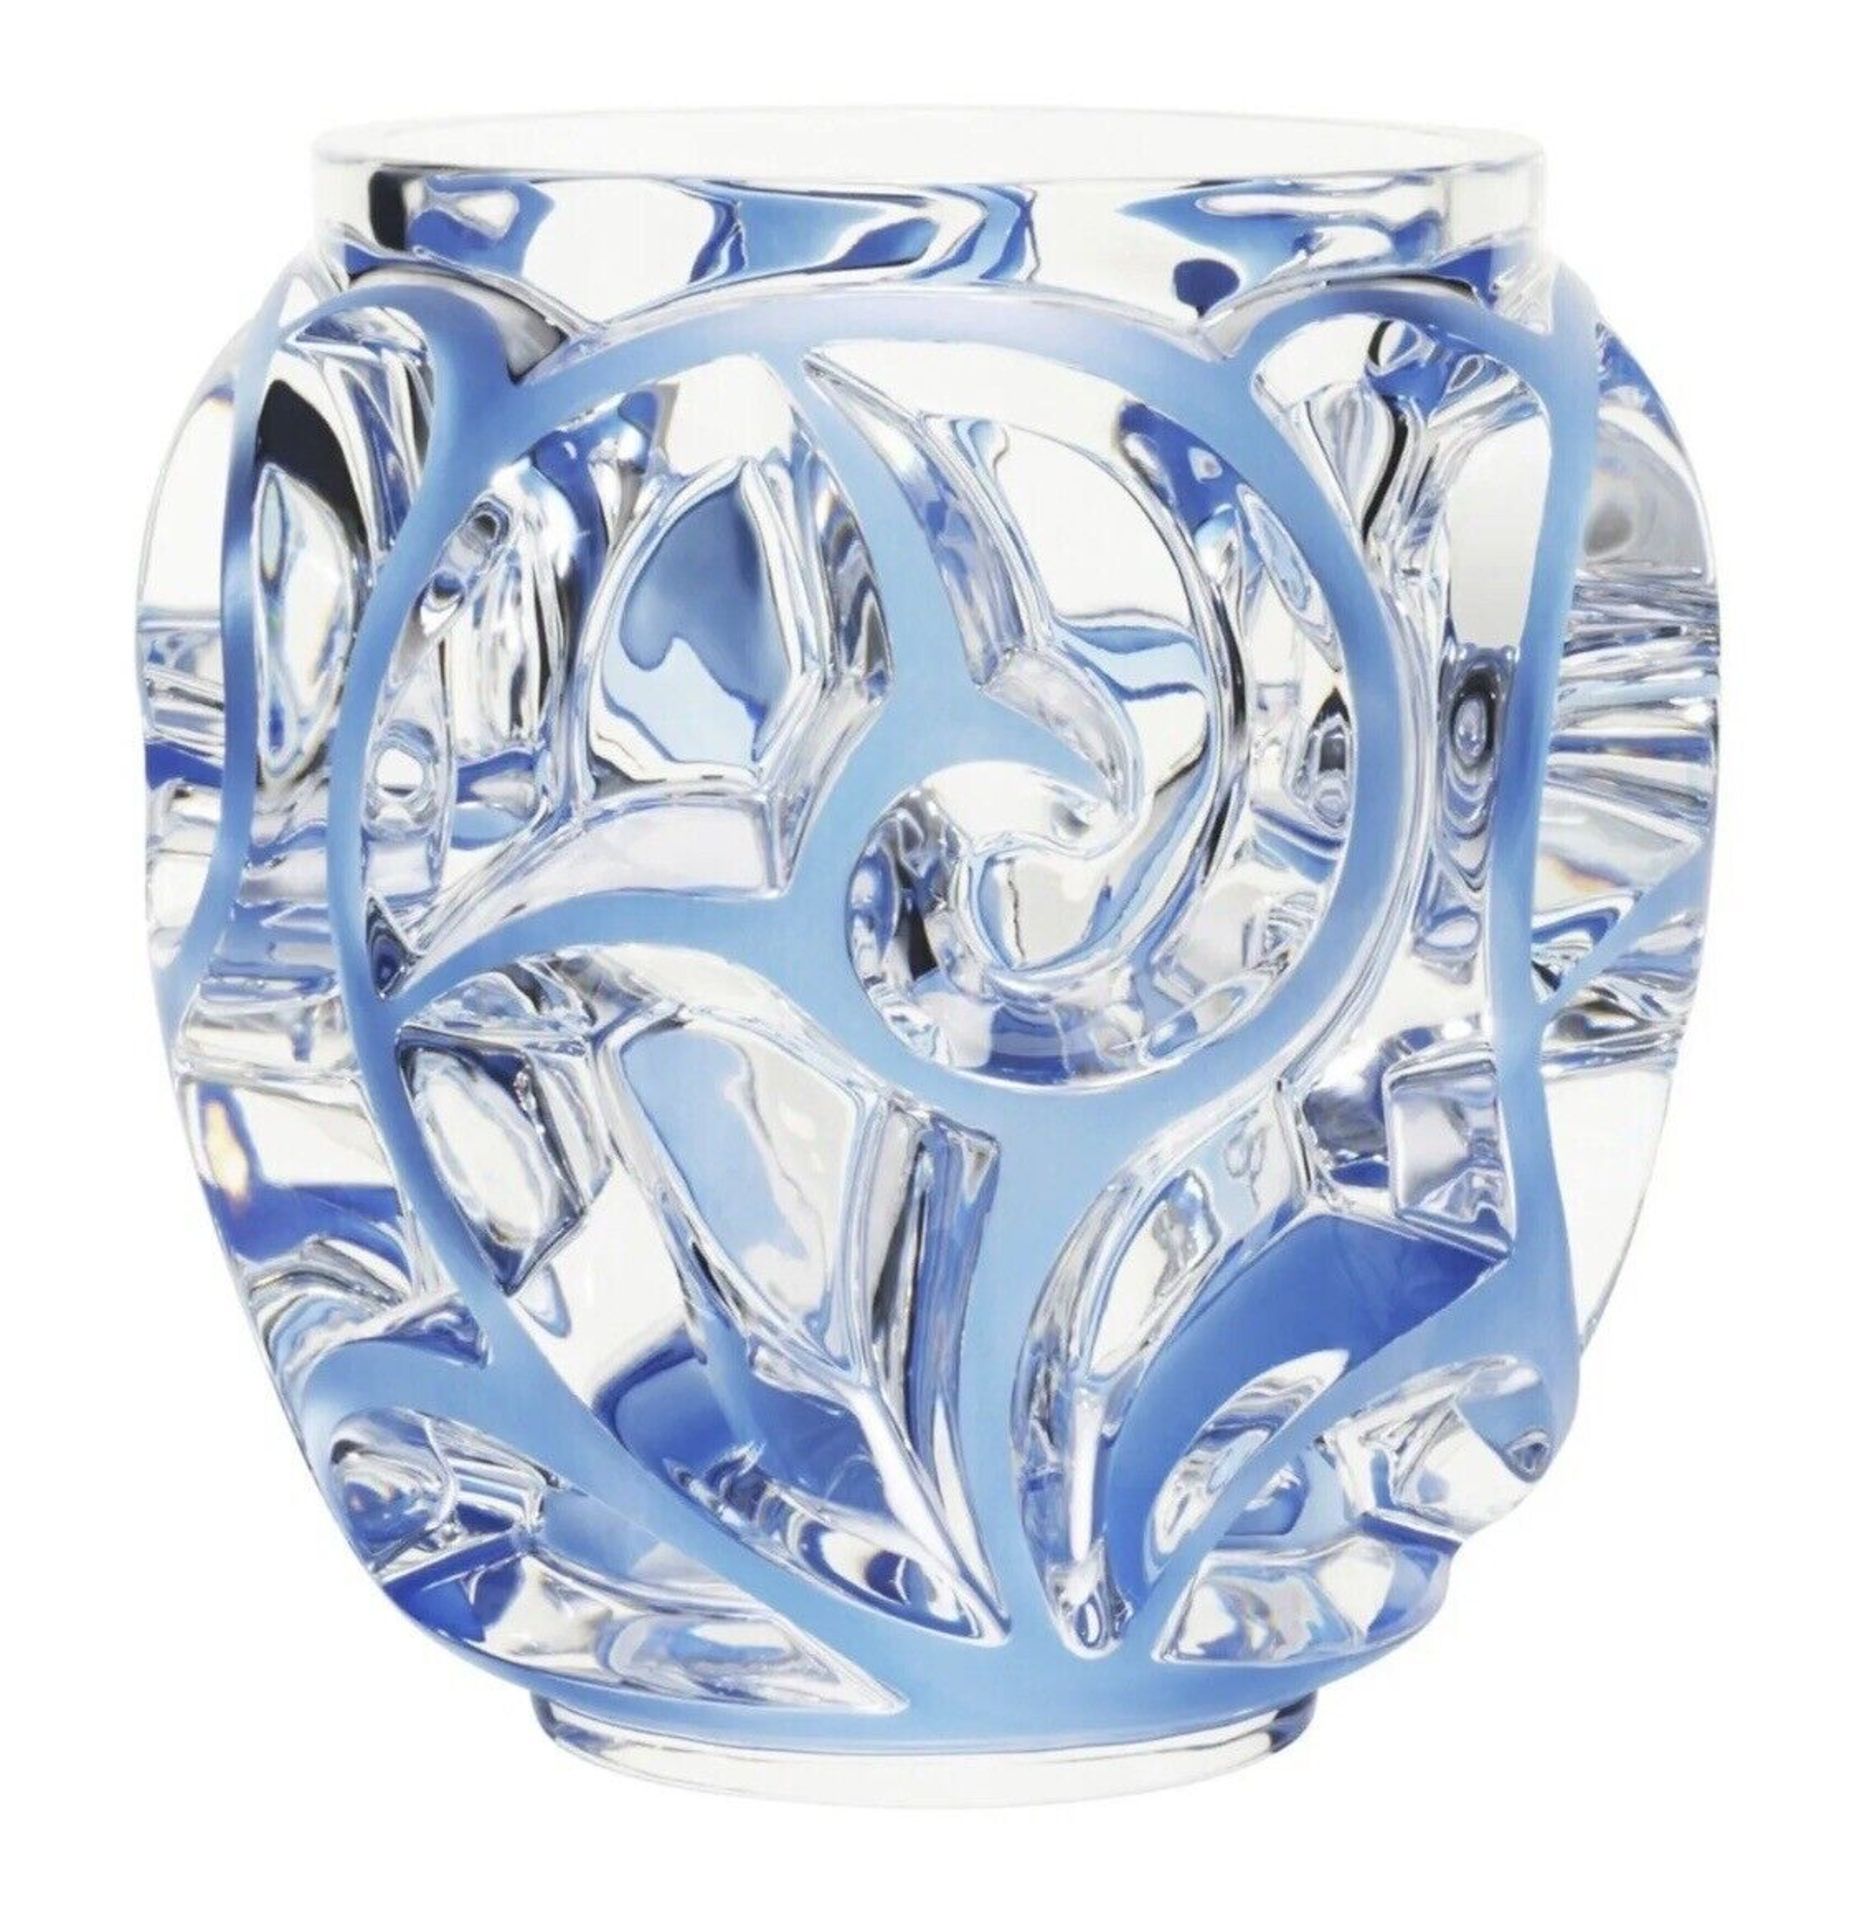 Lalique Crystal Tourbillons Clear & Blue Patina Vase Height 21 cm REF: 10441900